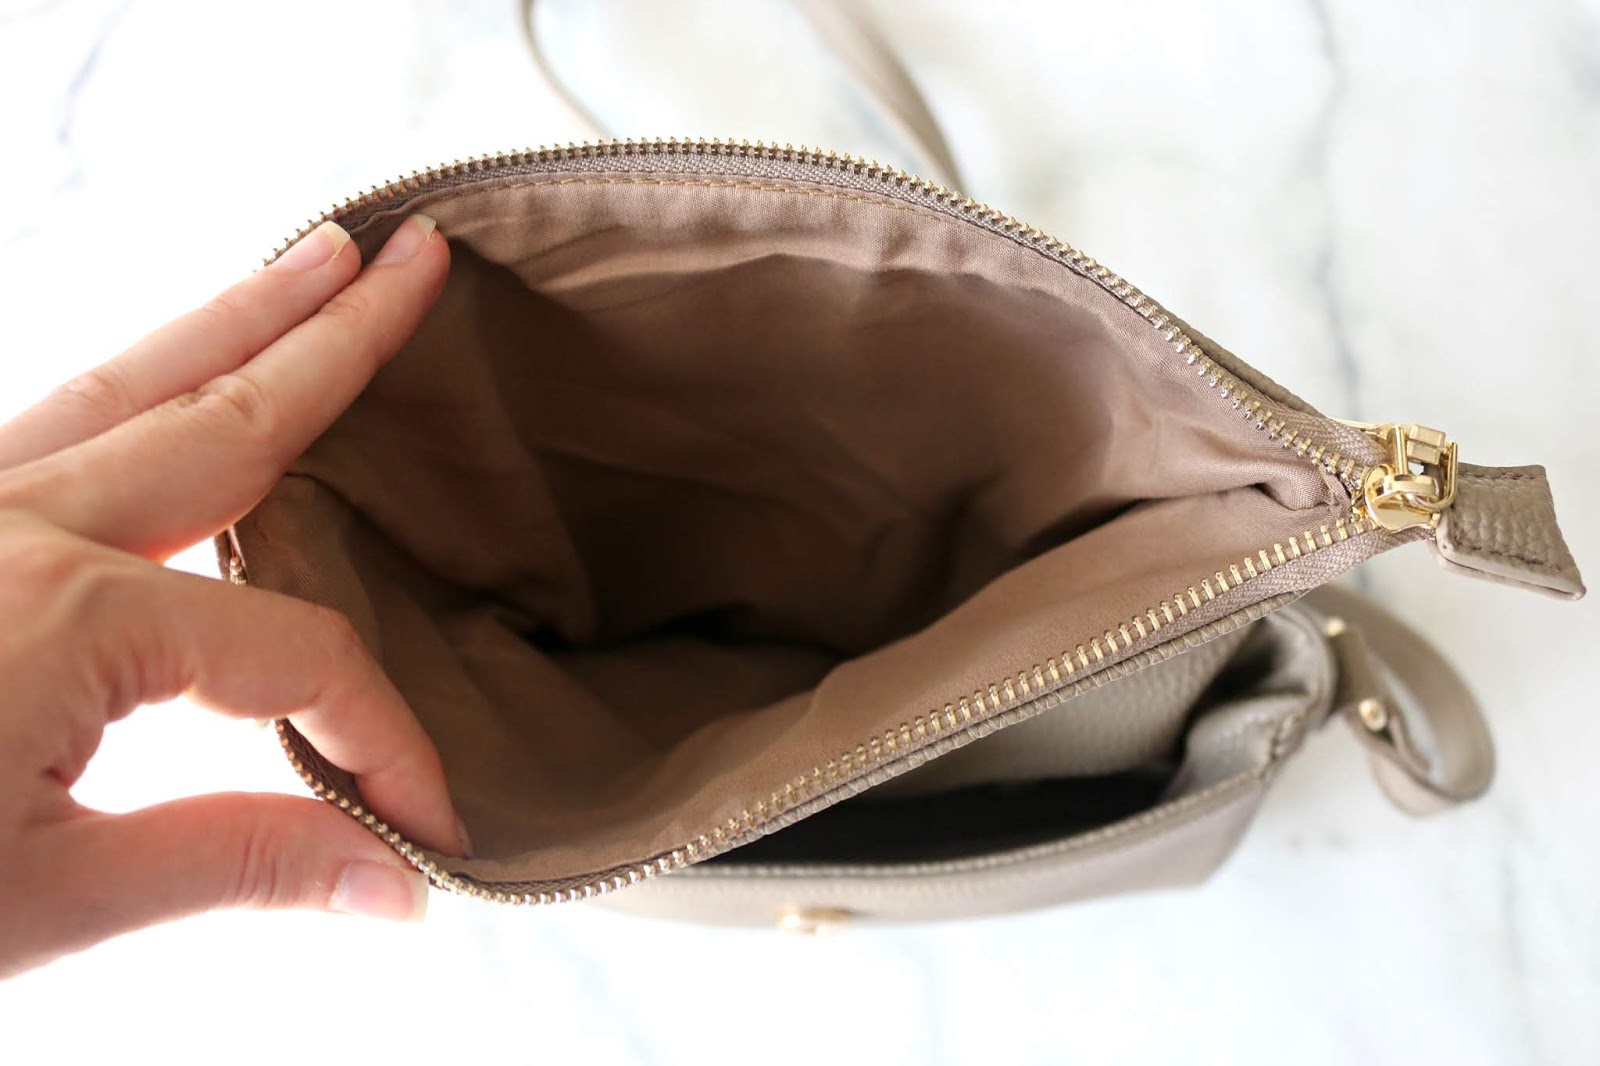 What's In My Bag Adrienne Vittadini Crossbody Bag Review